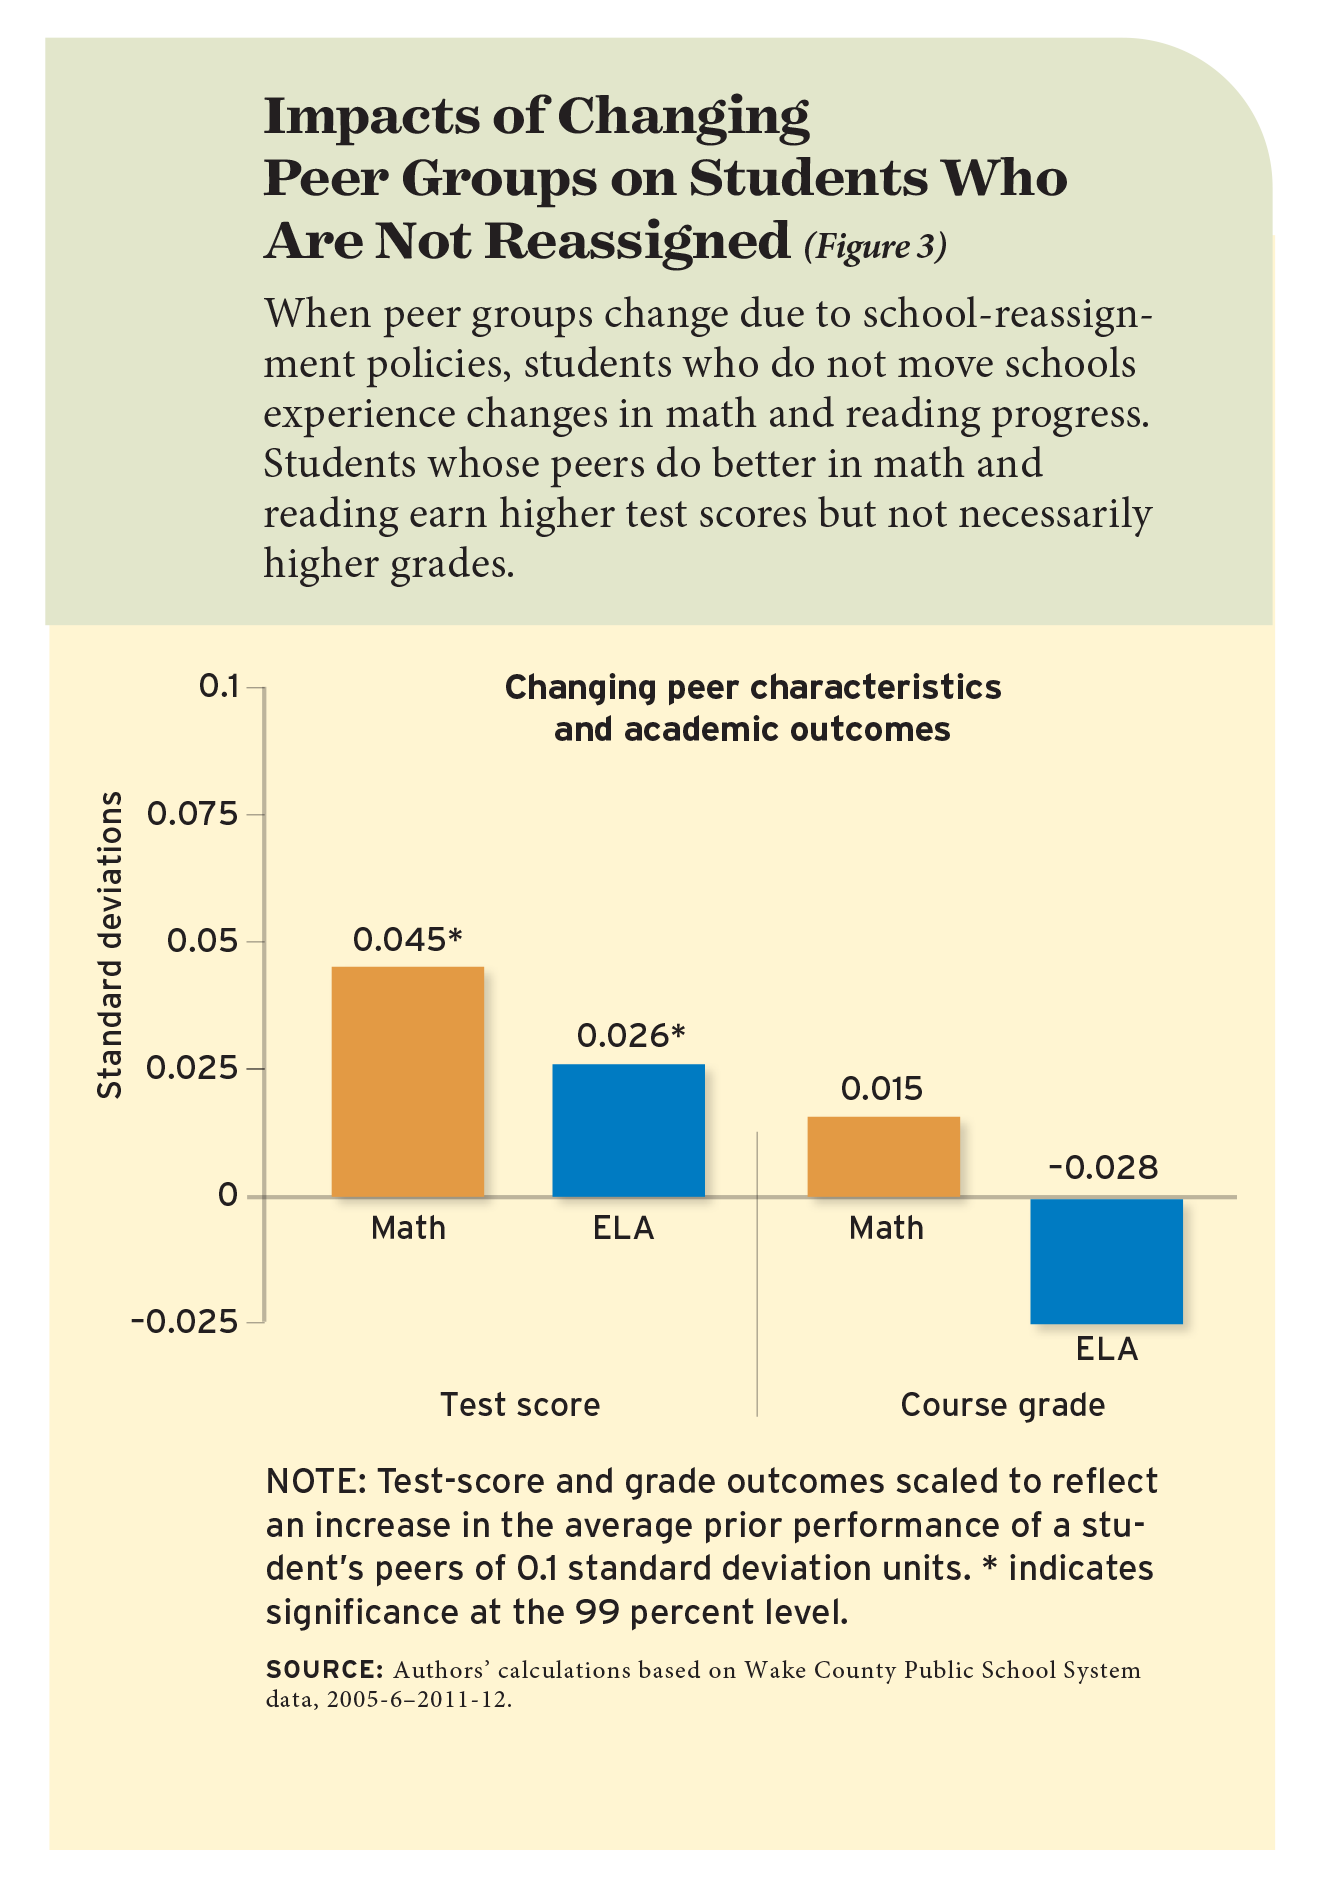 Impacts of Changing Peer Groups on Students Who Are Not Reassigned (Figure 3)